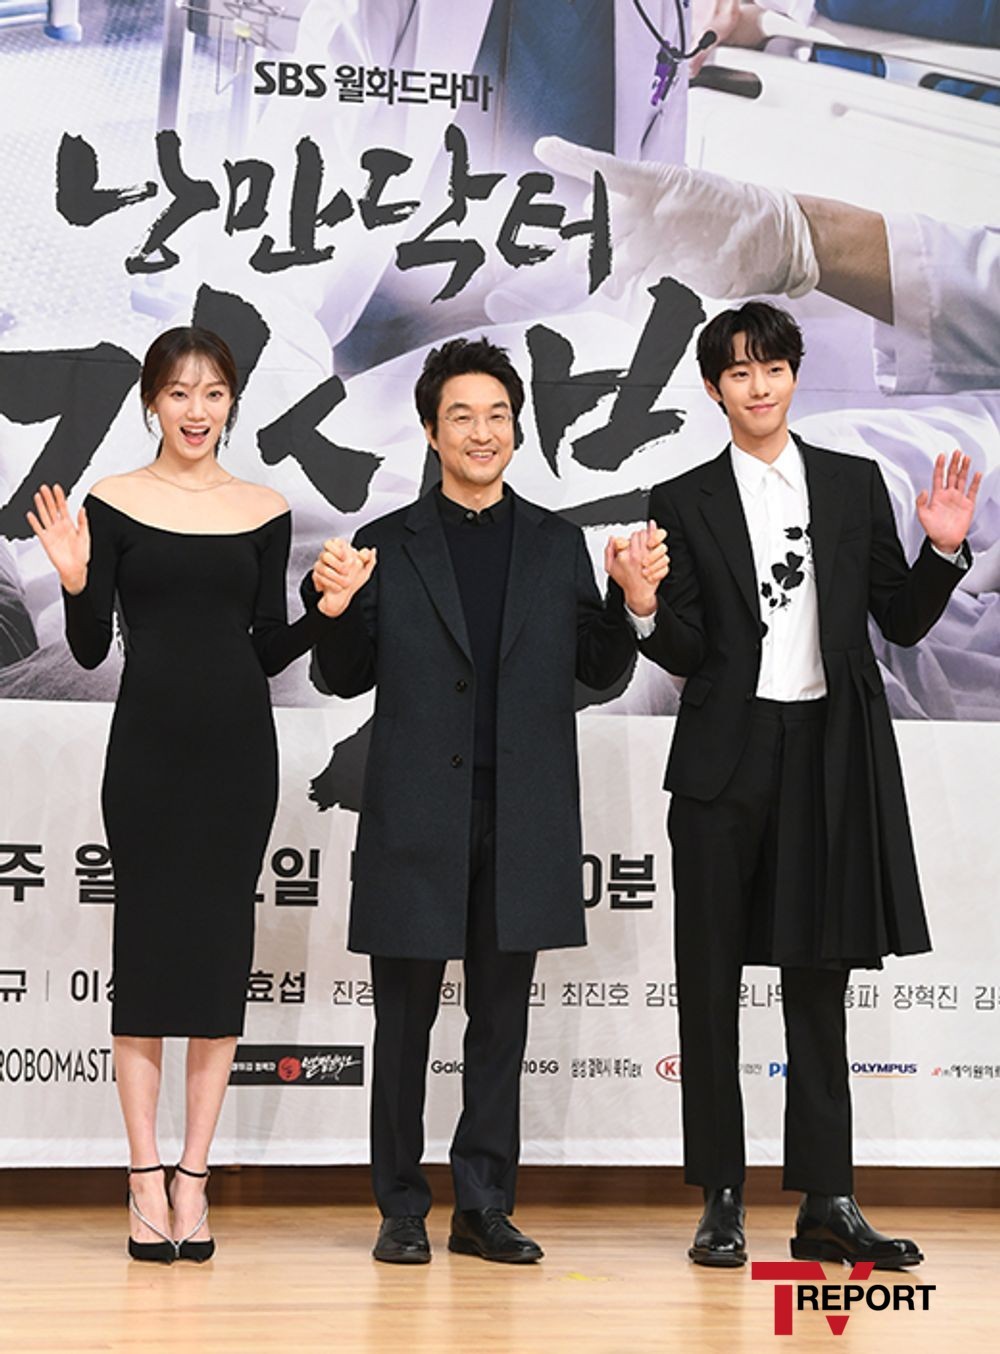 SBS New Moonhwa Drama Romantic Doctor Kim Sabu 2, which returned to season 2, was confident that it would be more fun.Actors and director Yoo In-sik expressed this confidence at the production presentation of Romantic Doctor Kim Sabu 2 at SBS in Mok-dong, Yangcheon-gu, Seoul on the 6th.Romantic Doctor Kim Sabu 2 was broadcast from November 2016 to January 2017, and the second season of Romantic Doctor Kim Sabu, which recorded an amazing audience rating of 27.6%.Kang Eun-kyung, director Yoo In-sik and Han Suk-kyu reunited in three years and collected topics.Romantic Doctor Kim Sabu 2 is a story of real doctor in the background of a poor stone wall hospital in the province. It contains the contents of meeting the geek genius doctor Kim Sabu (Han Suk-kyu) and going to the real romance of life.Expectations for #season2Director Yoo In-sik said, I thought that Season 1 was over and I could not do medical drama again with Kang Eun-kyung, but I could not do season 2 every time I met.Above all, I remember that I was really happy in the process of meeting, so if there are actors who share our intentions, I tried to do it together, but I knew that the family members of the stone wall hospital including Han Suk-kyu were the same mind. Yoo said, Season 2 is a gift to those who missed season 1 and made it among us.However, after making it, I thought medical drama was hard, he said. I believe that the warmth and longing I felt during season 1 will be a good feeling for viewers. In particular, season 1 was very popular with the highest audience rating of 27.6%. Is there any burden on season 2 box office?Director Yoo In-sik said: If you expected the same glory as in Season 1, you would not have started because you were burdened.I did my best to revive the atmosphere and feelings of season 1 more than the figures, he said. It would be simplest to say that a new air came into the atmosphere of season 1. Actors Han Suk-kyu, Jin Kyeong, Im Won-hee, Kim Min-jae and Yun-nam became members of the old stone wall after season 1.The members of the Shin Stone Dam are Lee Sung-kyung, Ahn Hyo-seop, Kim Joo-heon and Shin Dong-wook. All members of the Goo and Shin Stone Dam are honored to appear in season 2.In particular, Jin Kyeong and Im Won-hee raised expectations that the story was stronger and more fun than season 1.#Ahn Hyo-seop, Lee Sung-kyung newly joinedIn particular, the key members who newly joined Romantic Doctor Kim Sabu 2 are Ahn Hyo-seop and Lee Sung-kyung.Ahn Hyo-seop is a cynical man who does not believe in happiness because he has suffered a hard life, but in the operating room, he plays the role of Seo Woo-jin, a surgeons second-year surgeon, who has excellent skills with tremendous concentration.Lee Sung-kyung plays the role of Cha Eun-jae, a self-confident elite surgeon fellow who is a woman who is a personal period and a hobby of studying, and who is far from frustration, fallout, and failure.Ahn Hyo-seop commented on the season 2 appearance, I also seem to have been burdened as a listener of season 1.I want to sublimate the burden with passion and show it as good as possible in the future. Han Suk-kyu is also a mentor and said he is learning a lot and shooting.Lee Sung-kyung said, My seniors told me to play comfortably from the beginning.I am really shooting because I am so warm and well taught by my seniors. He said that he will show himself growing like a character.The breath of the two newly joined members is also expected: Ahn Hyo-seop said Lee Sung-kyung is highly positive as an energizer.Lee Sung-kyung responded with praise, saying, Mr. Hyo-seop works really hard, he studies so much, and it seems to be a lot of stimulus.In addition, director Yoo In-sik refers to the kissing gods of the two people and says, The atmosphere is quite different, but there is a pretty kissing god as good as season 1.I think it will come out soon, he said, raising expectations.# Differentiated Medical DramaHan Suk-kyu commented on the fact that Romantic Doctor Kim Sabu 2 differentiates itself from other medical dramas, saying, We think that romantic doctor is dealing with the story outside the hospital.If we deal with the story in the hospital in another medical drama, we deal with peoples stories widely. We deal with patients, doctors, doctors and doctors, but there is a relationship that is reborn through Doldam Hospital.In addition, the metaphorical solution of the current problems through various patients is different from other medical dramas. Han Suk-kyus real name in the play was Bu Yong-ju, the only triple board surgeon in Korea and a man once called Gods hand, but now he plays Kim Sa-bu, a reclusive geek doctor who calls himself a romantic doctor and keeps a doldam hospital where the signboard does not come in properly.The Doldam Hospital is a difficult place to exist, it is a world where it is hard to work because it is broken without any patients coming in.Doldam Hospital is a hospital where you are somewhere, and when you look at the people who work, you are a stupid romantic, and there are new waves such as pressure from a huge hospital and differences in the values ​​of new doctors.I can maintain the wishes and beliefs of the mongolians in it, and how to find a solution there and how to do it. I think the process of finding the answer in the drama desperately is the message we give.I can not deal with realistic problems outside the hospital, but I tried to contain the troubles of the professionals living in the present age. Romantic Doctor Kim Sabu 2 will be broadcast for the first time at 9:40 pm on the 6th.